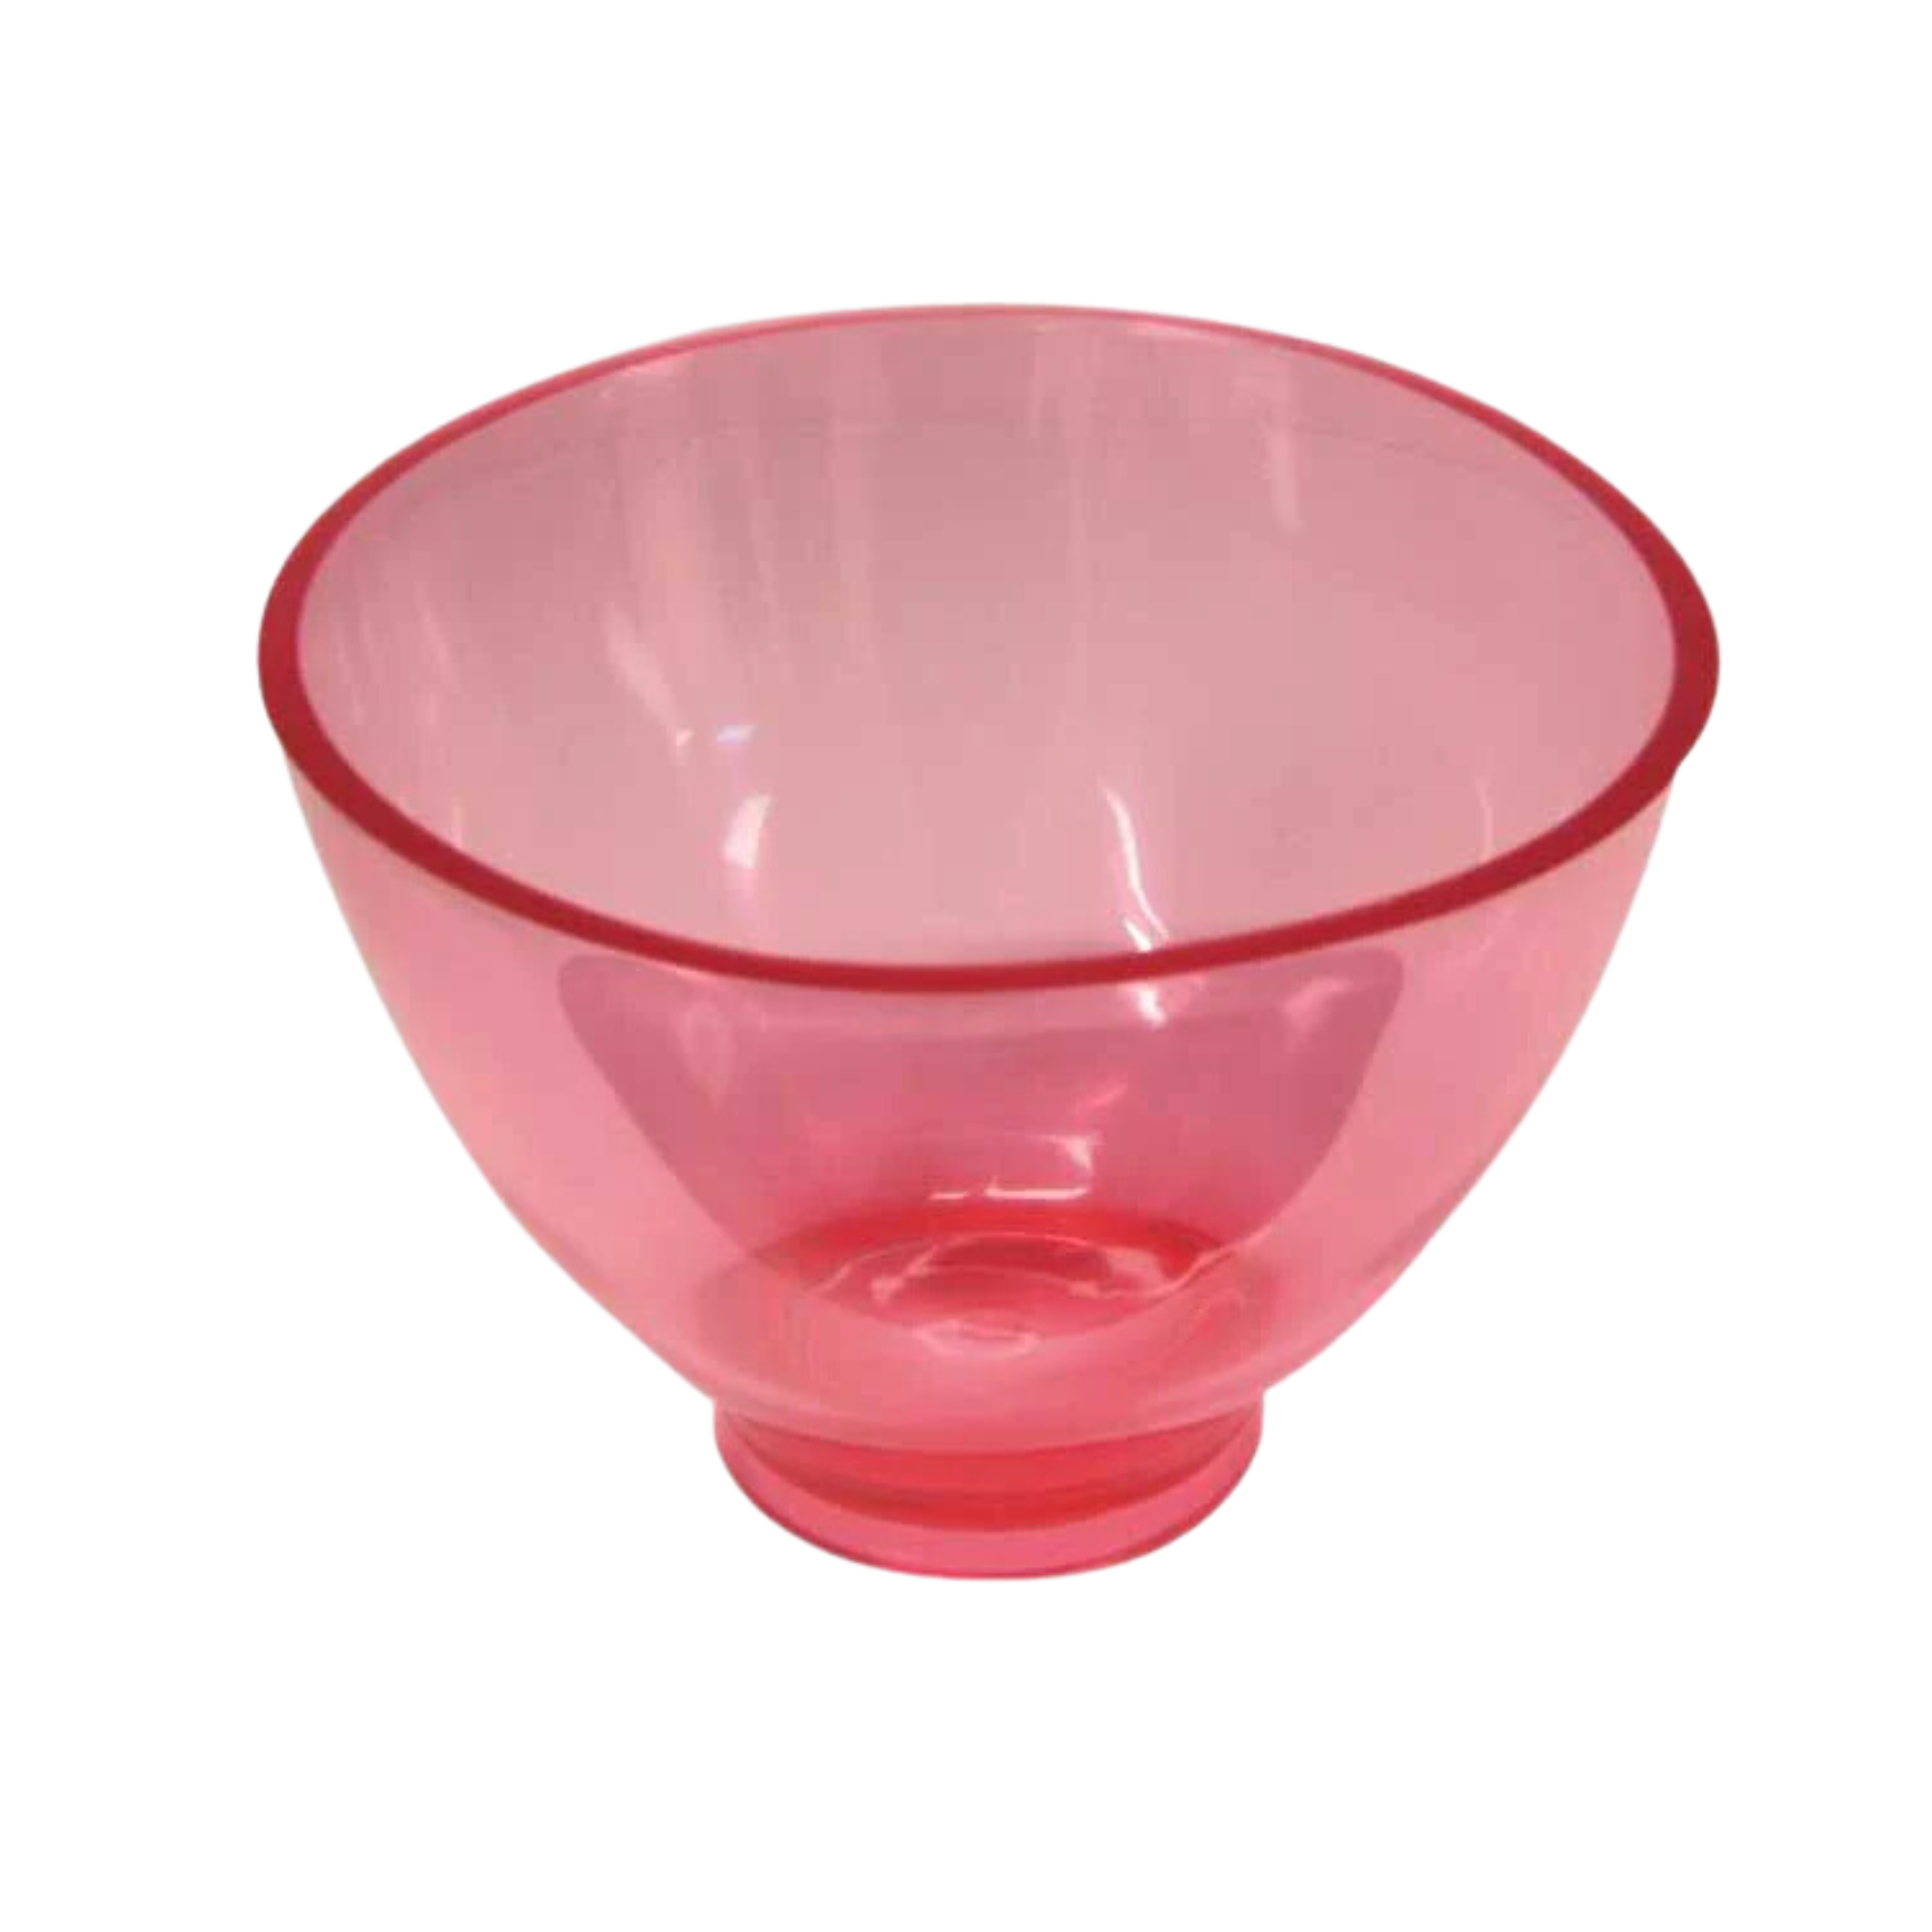 Large Flexible Mixing Bowl, Red